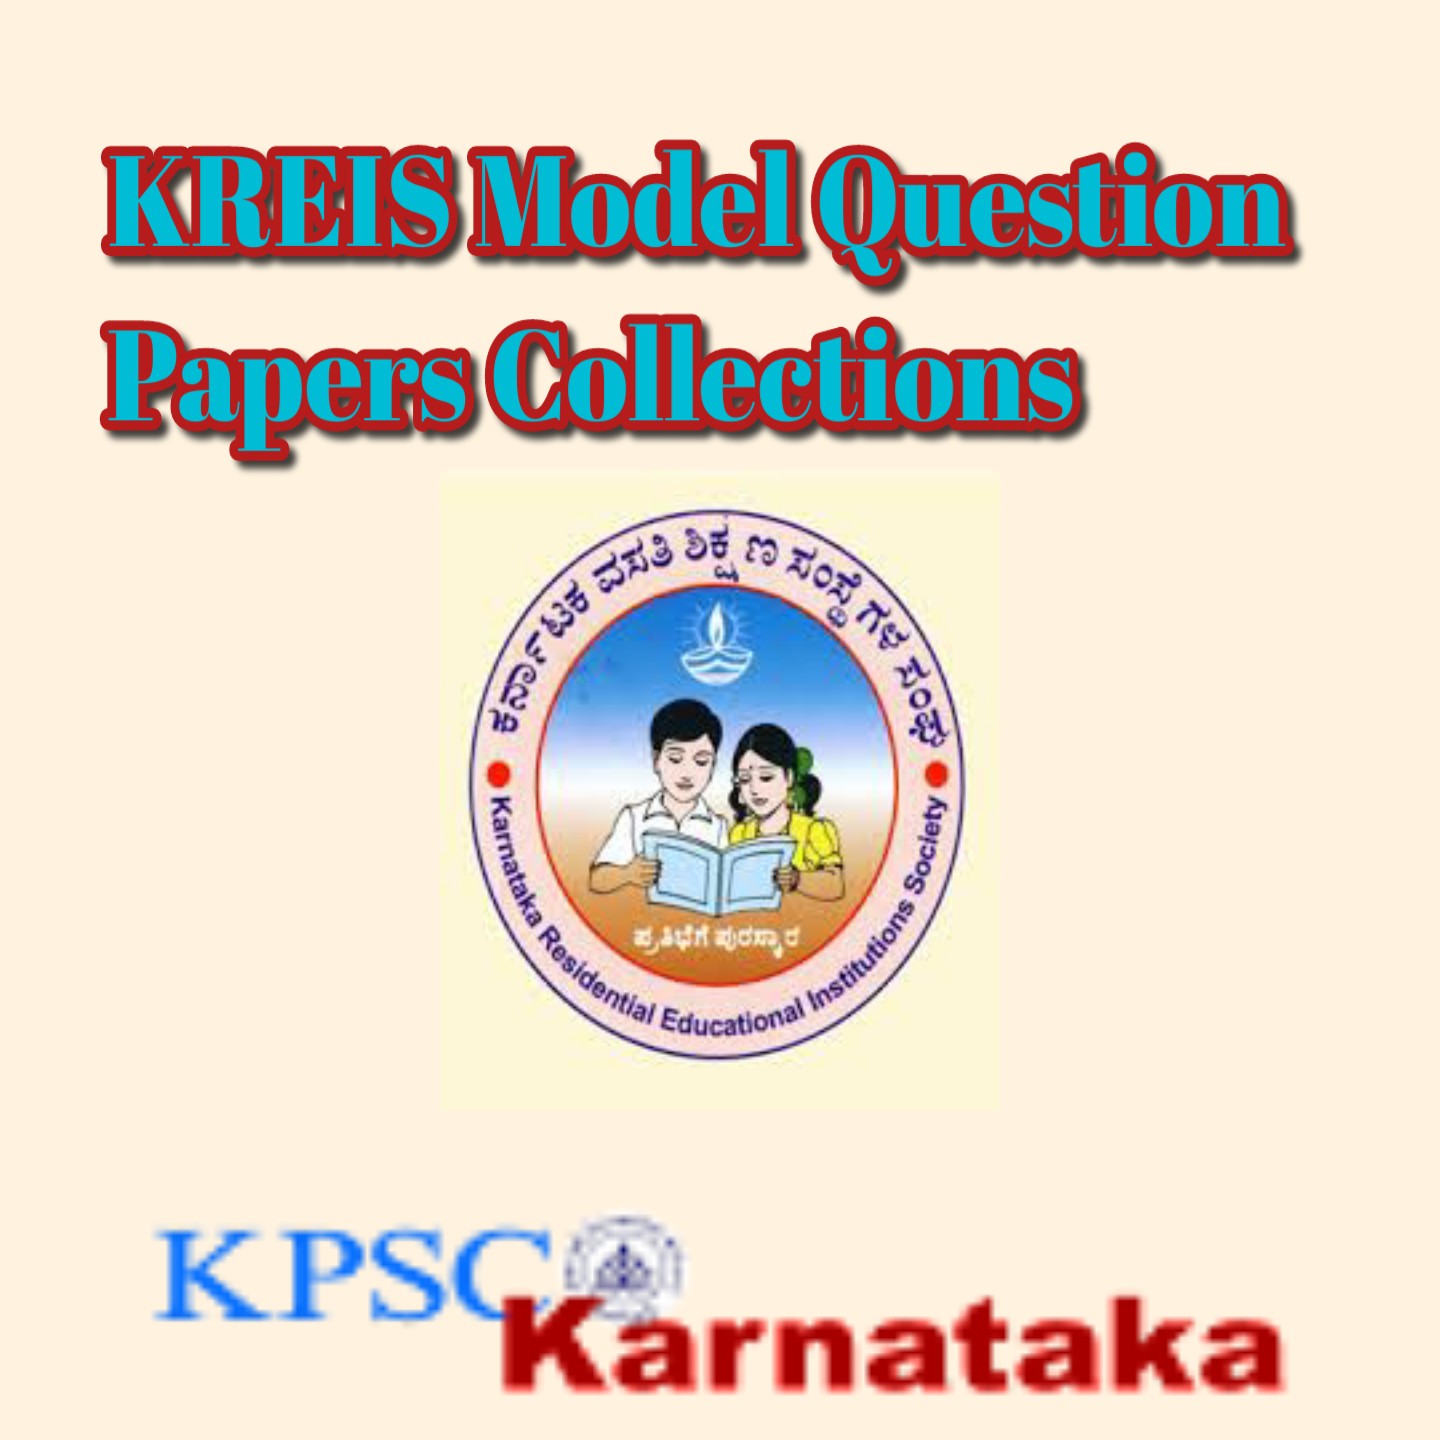 KREIS Model Question Papers Collections